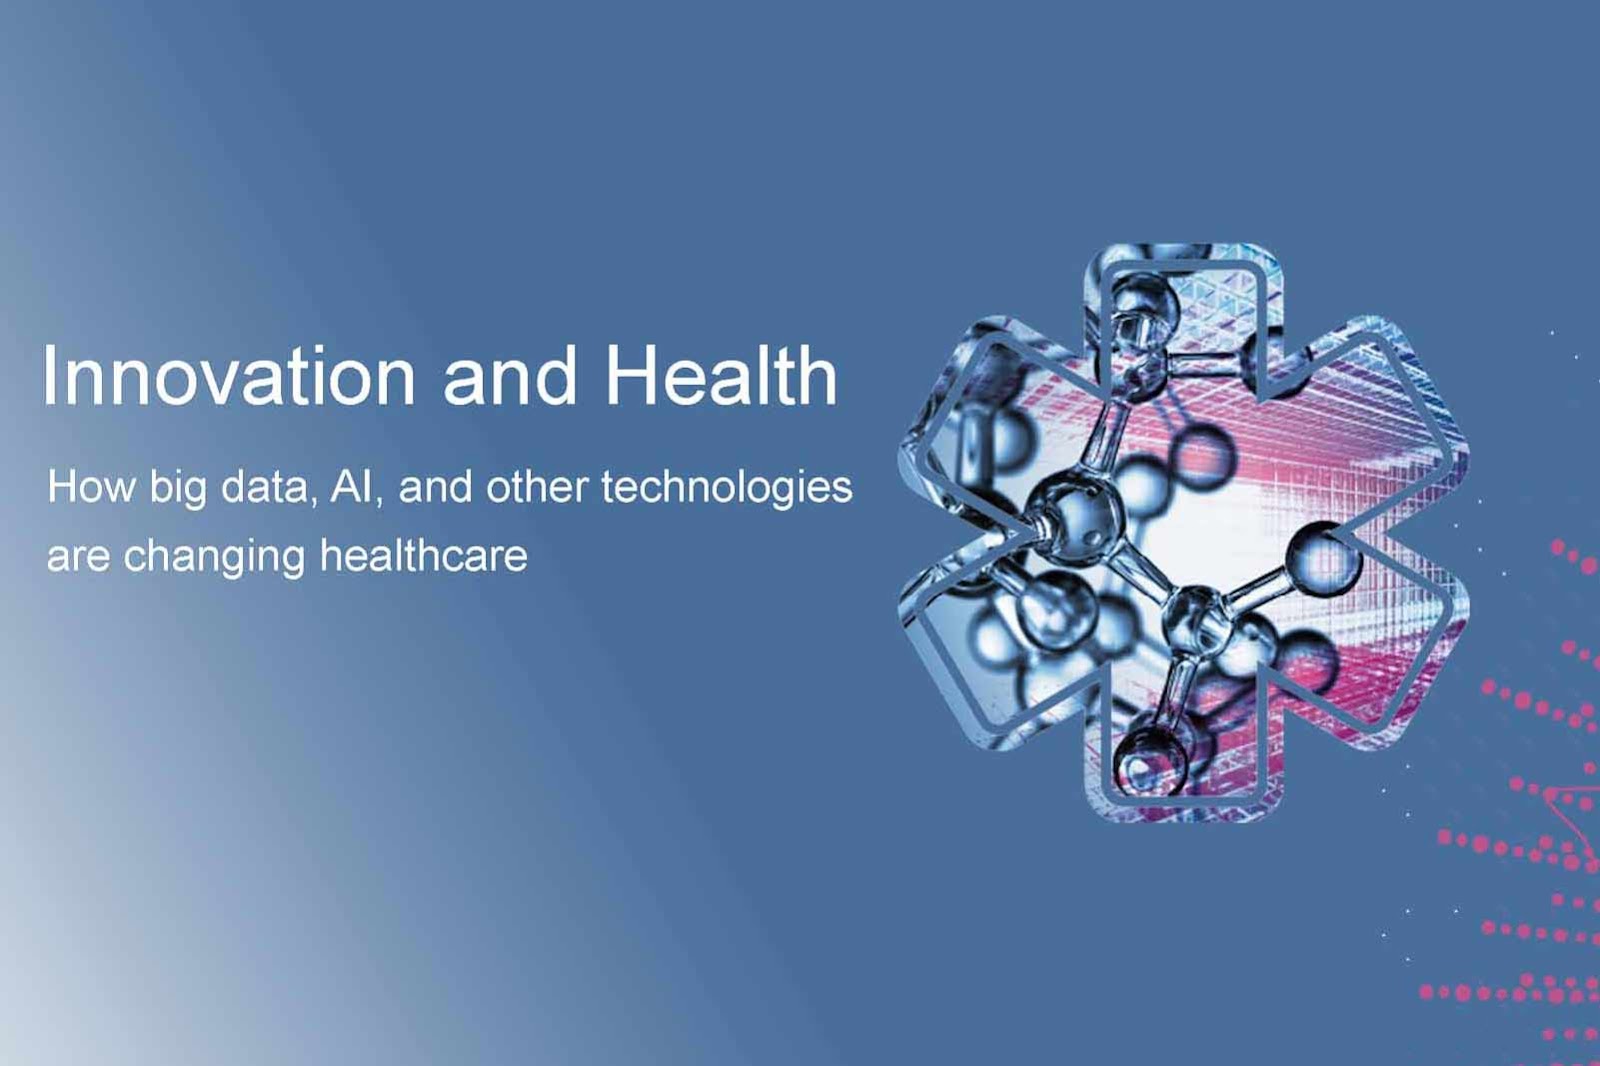 which organizations goal is centered on health information technology